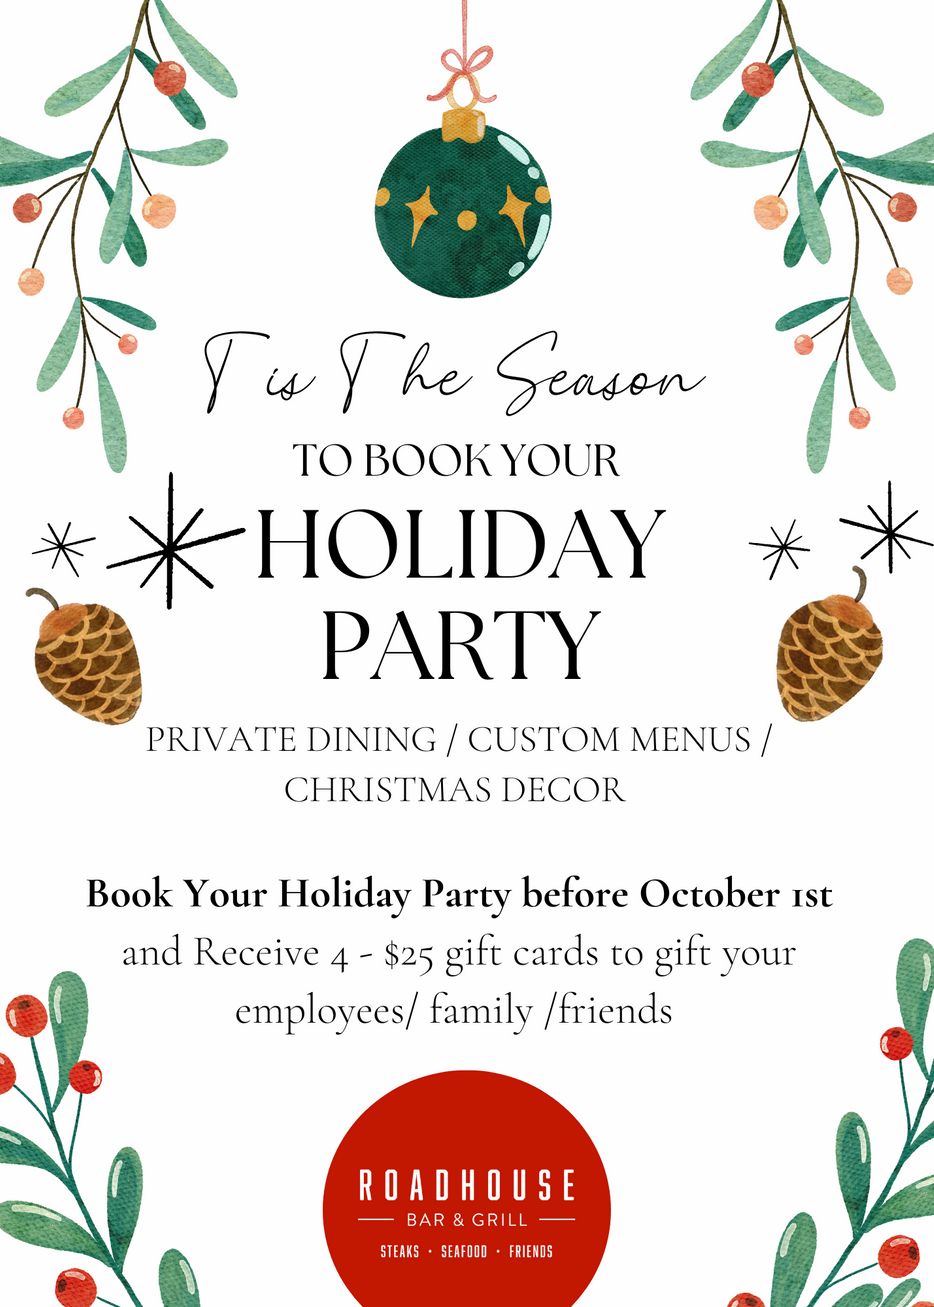 Copy of holiday party .png